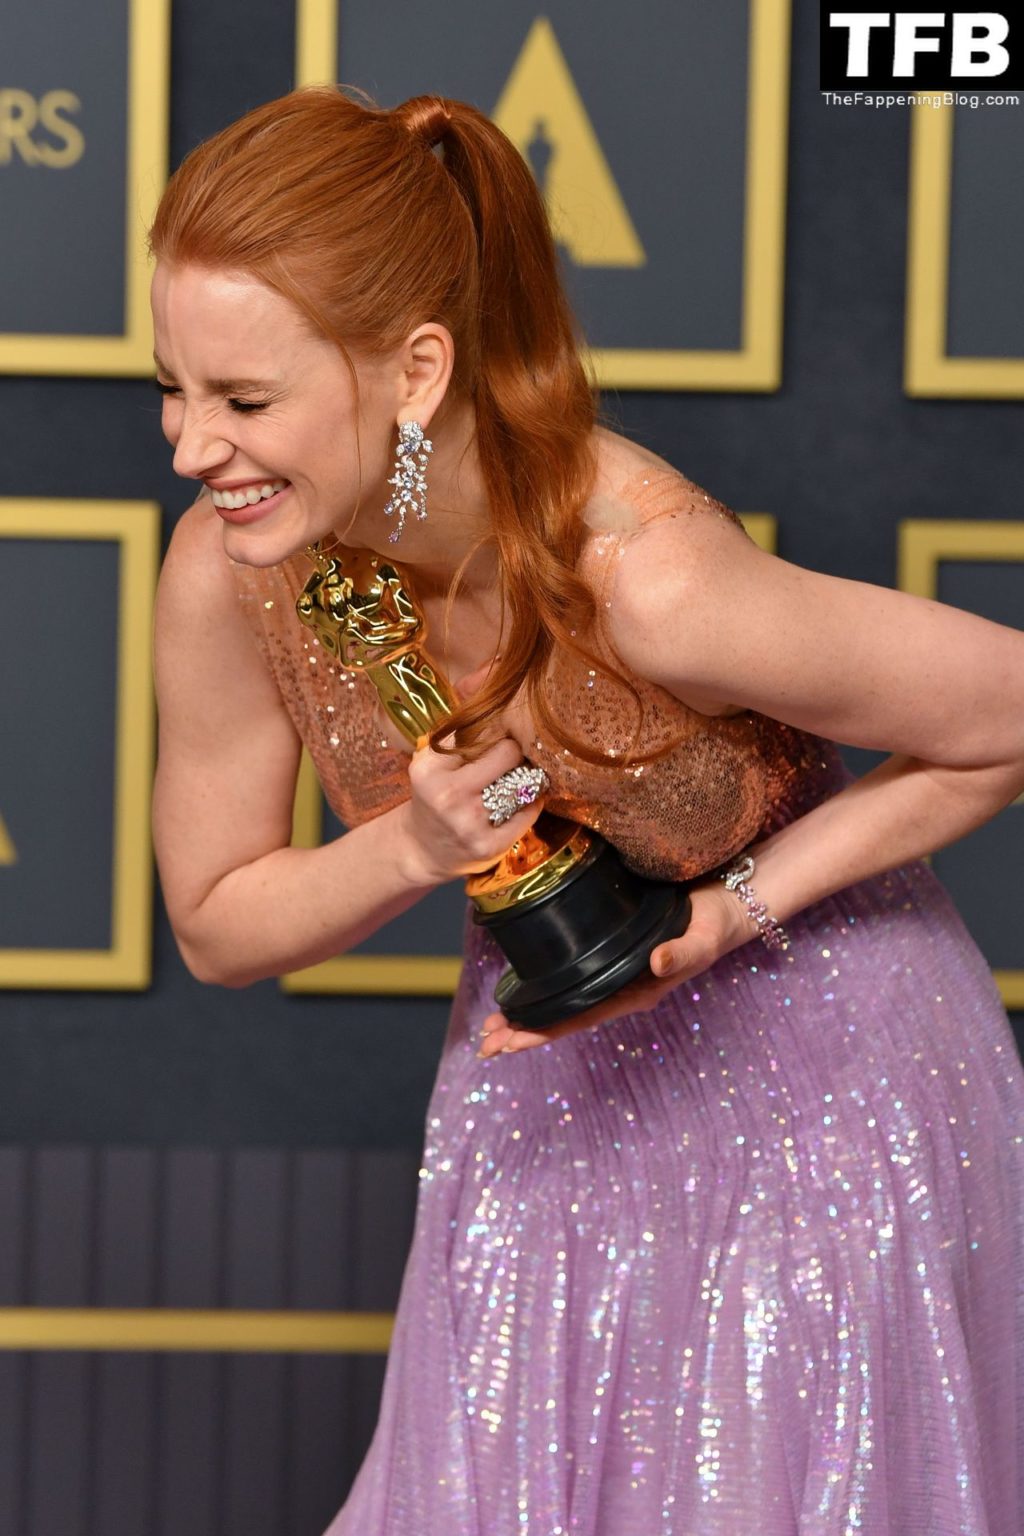 Jessica Chastain Sexy The Fappening Blog 43 1 1024x1536 - Jessica Chastain Poses With Her Oscar at the 94th Academy Awards (150 Photos)